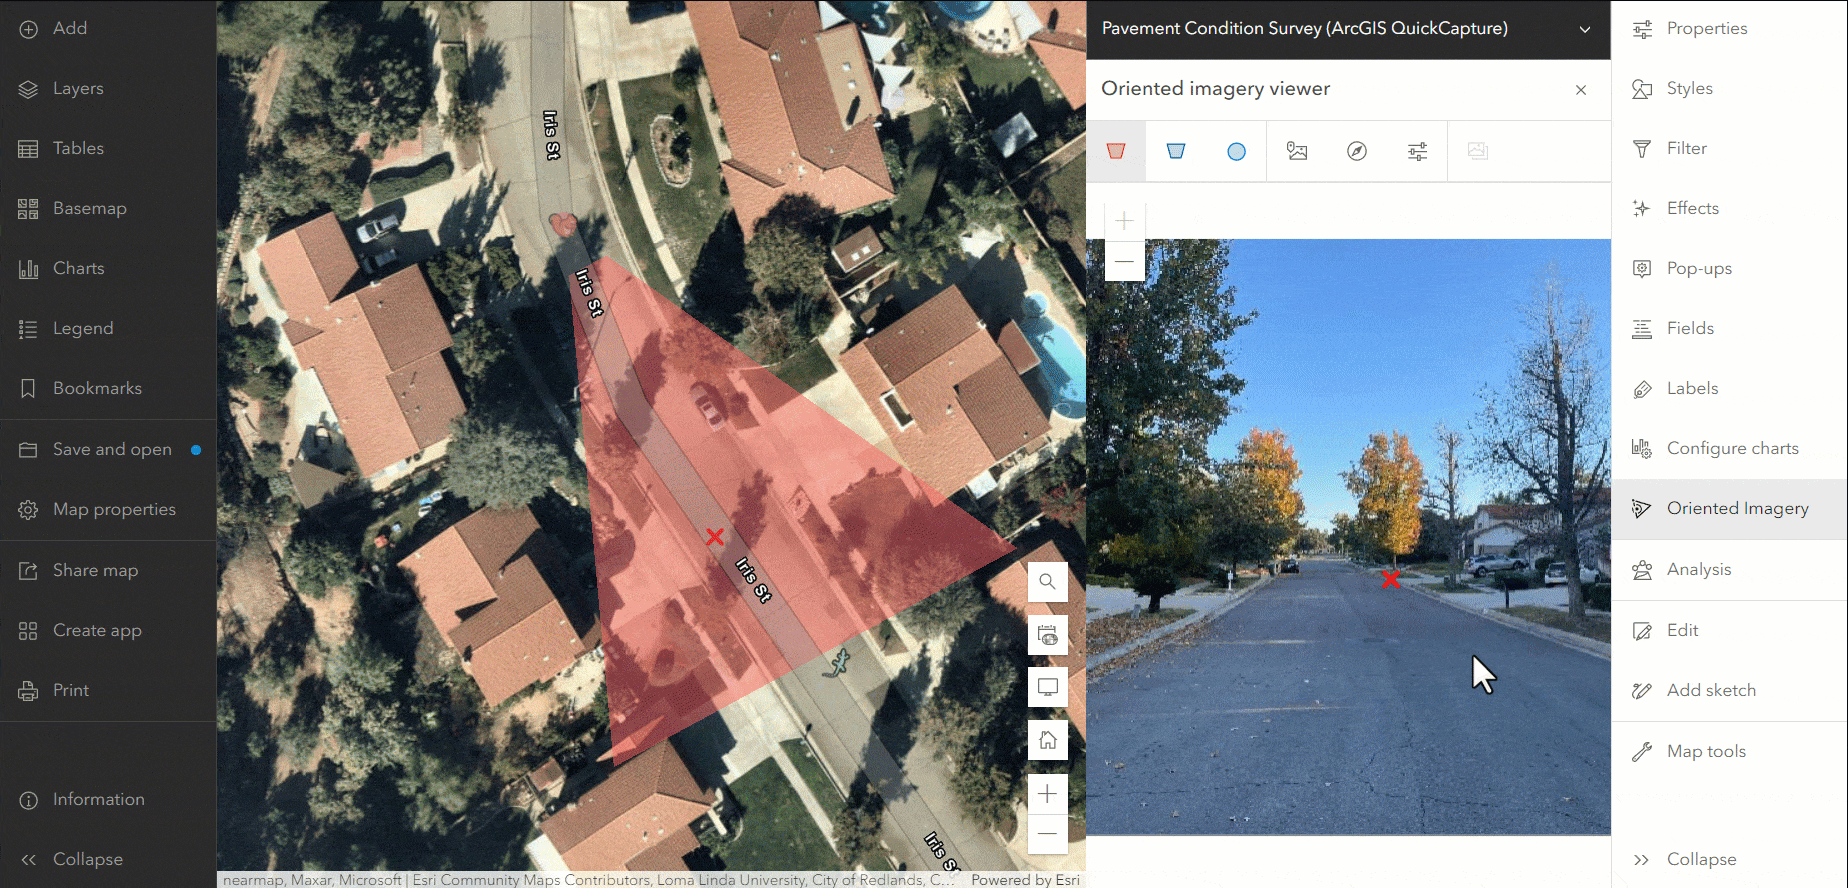 This animation shows the new Map Viewer Oriented Imagery widget. Oriented Imagery can be collected with ArcGIS QuickCapture